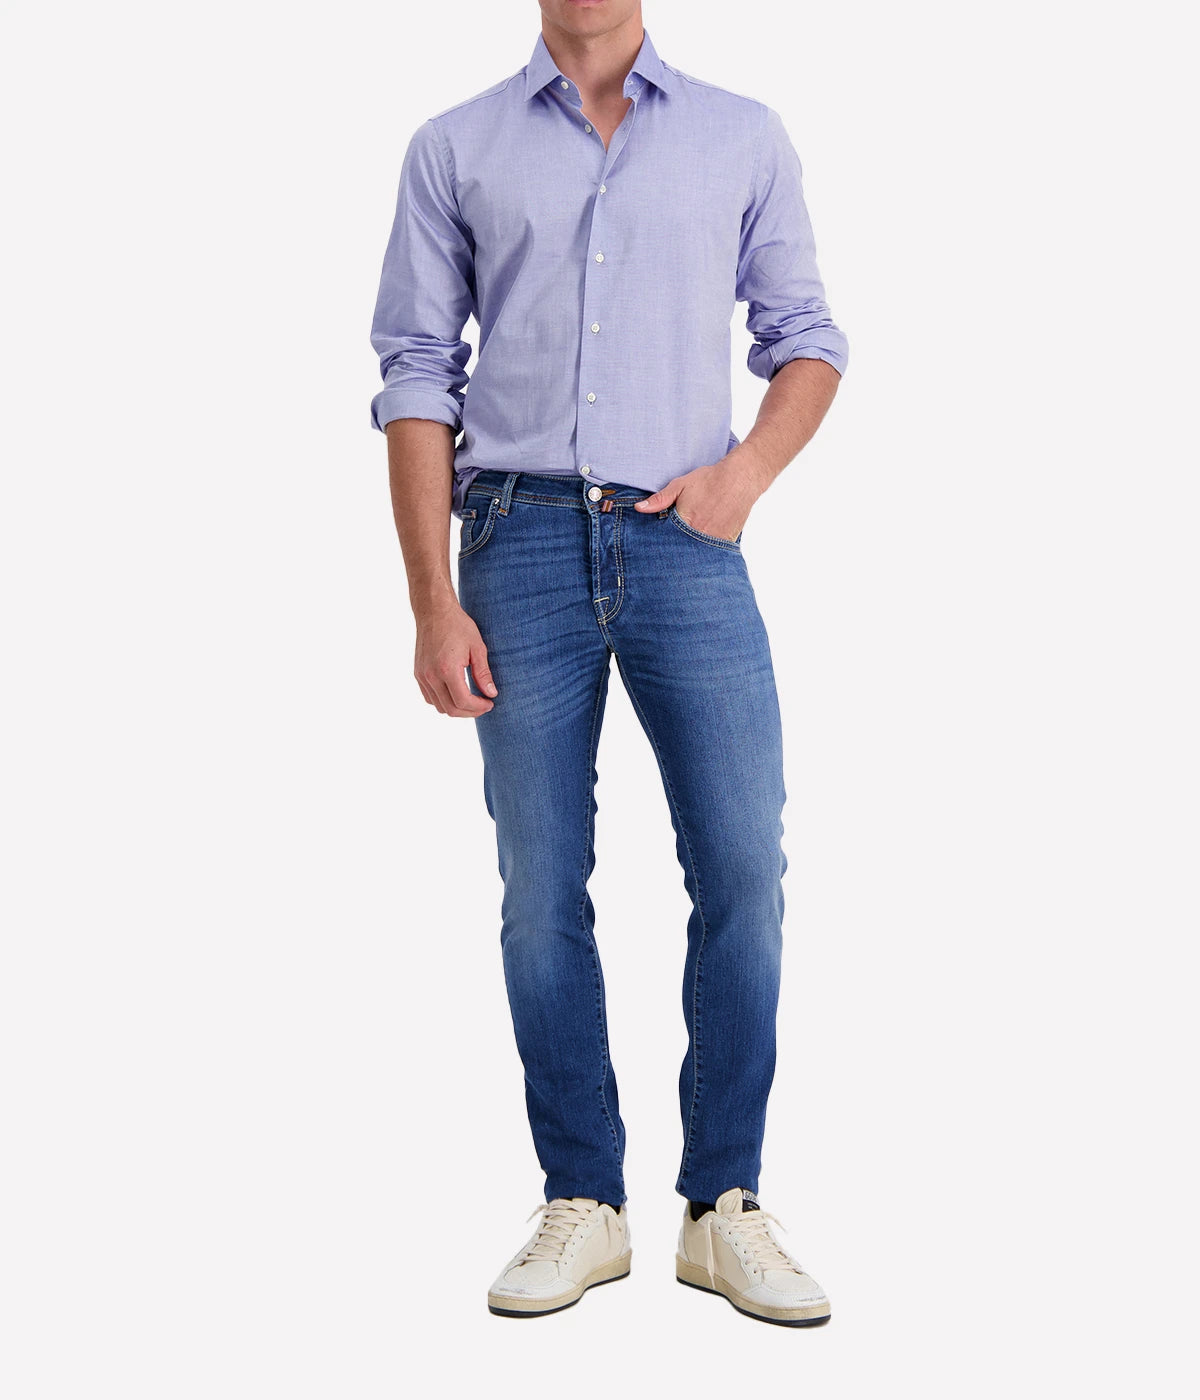 Slim Fit Shirt in Blue